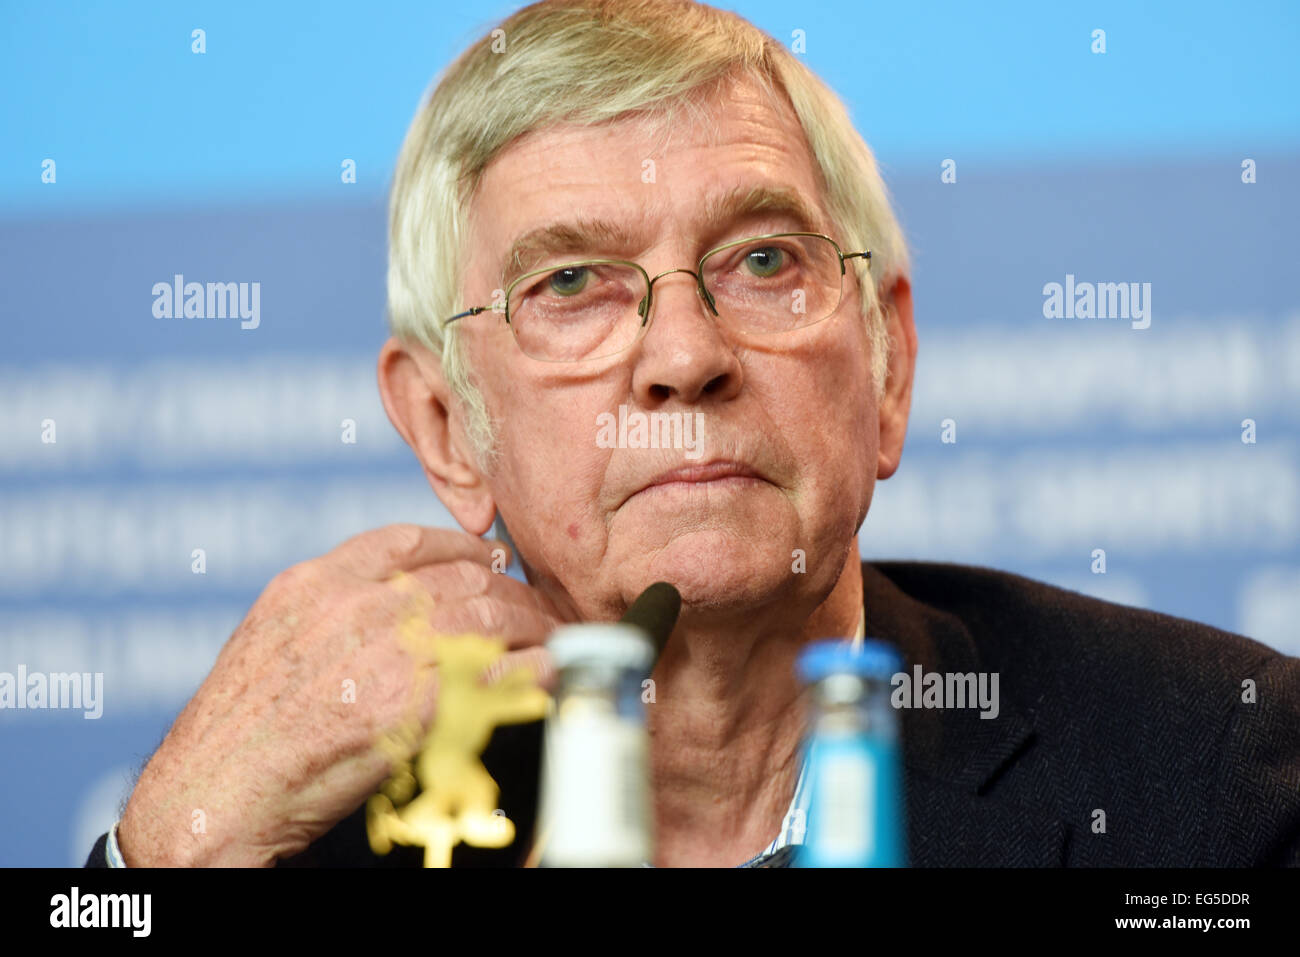 Tom Courtenay Actor 45 Years, Press Conf., Berlin Film Festival Berlinale Palast, Berlin, Germany 17 February 2015 Dit76690 © Allstar Picture Library/Alamy Live News Stock Photo